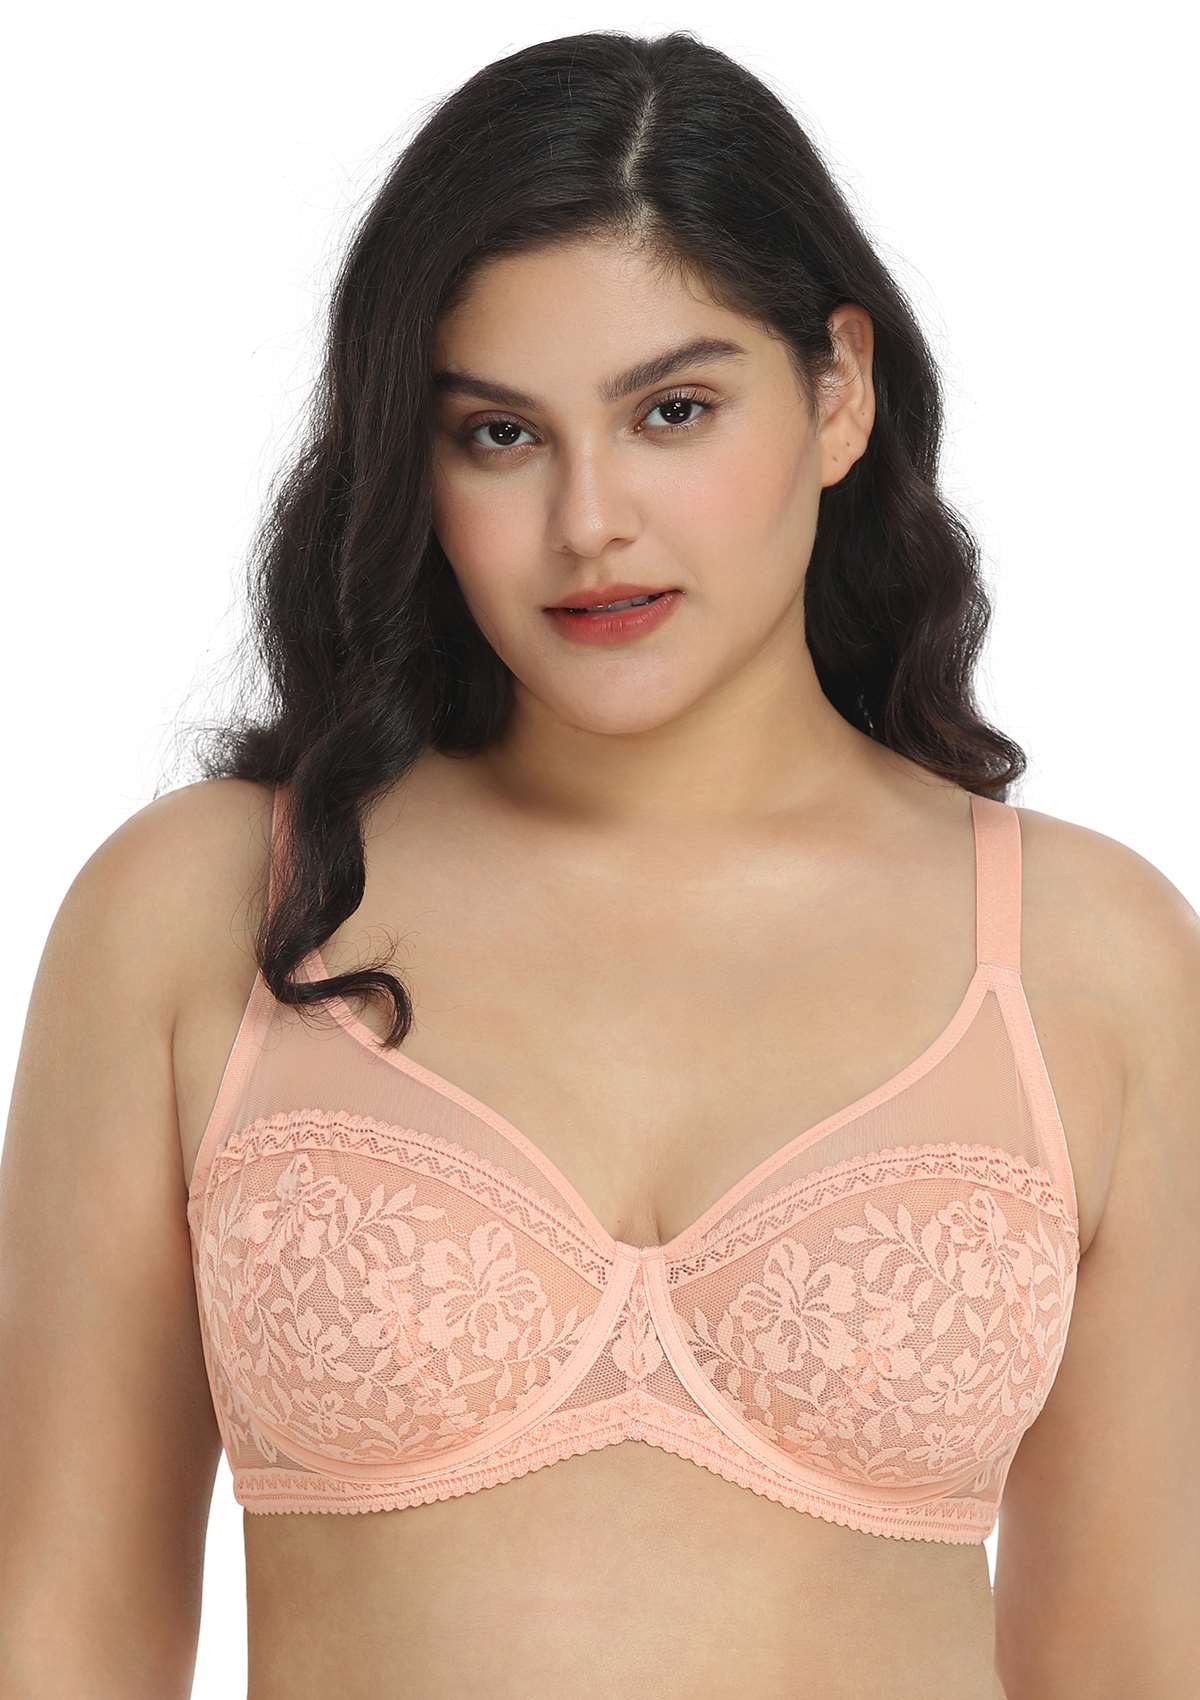 HSIA Gladioli Lace Mesh Minimizing Unlined Underwire Bra For Fuller Busts - Peach / 44 / G